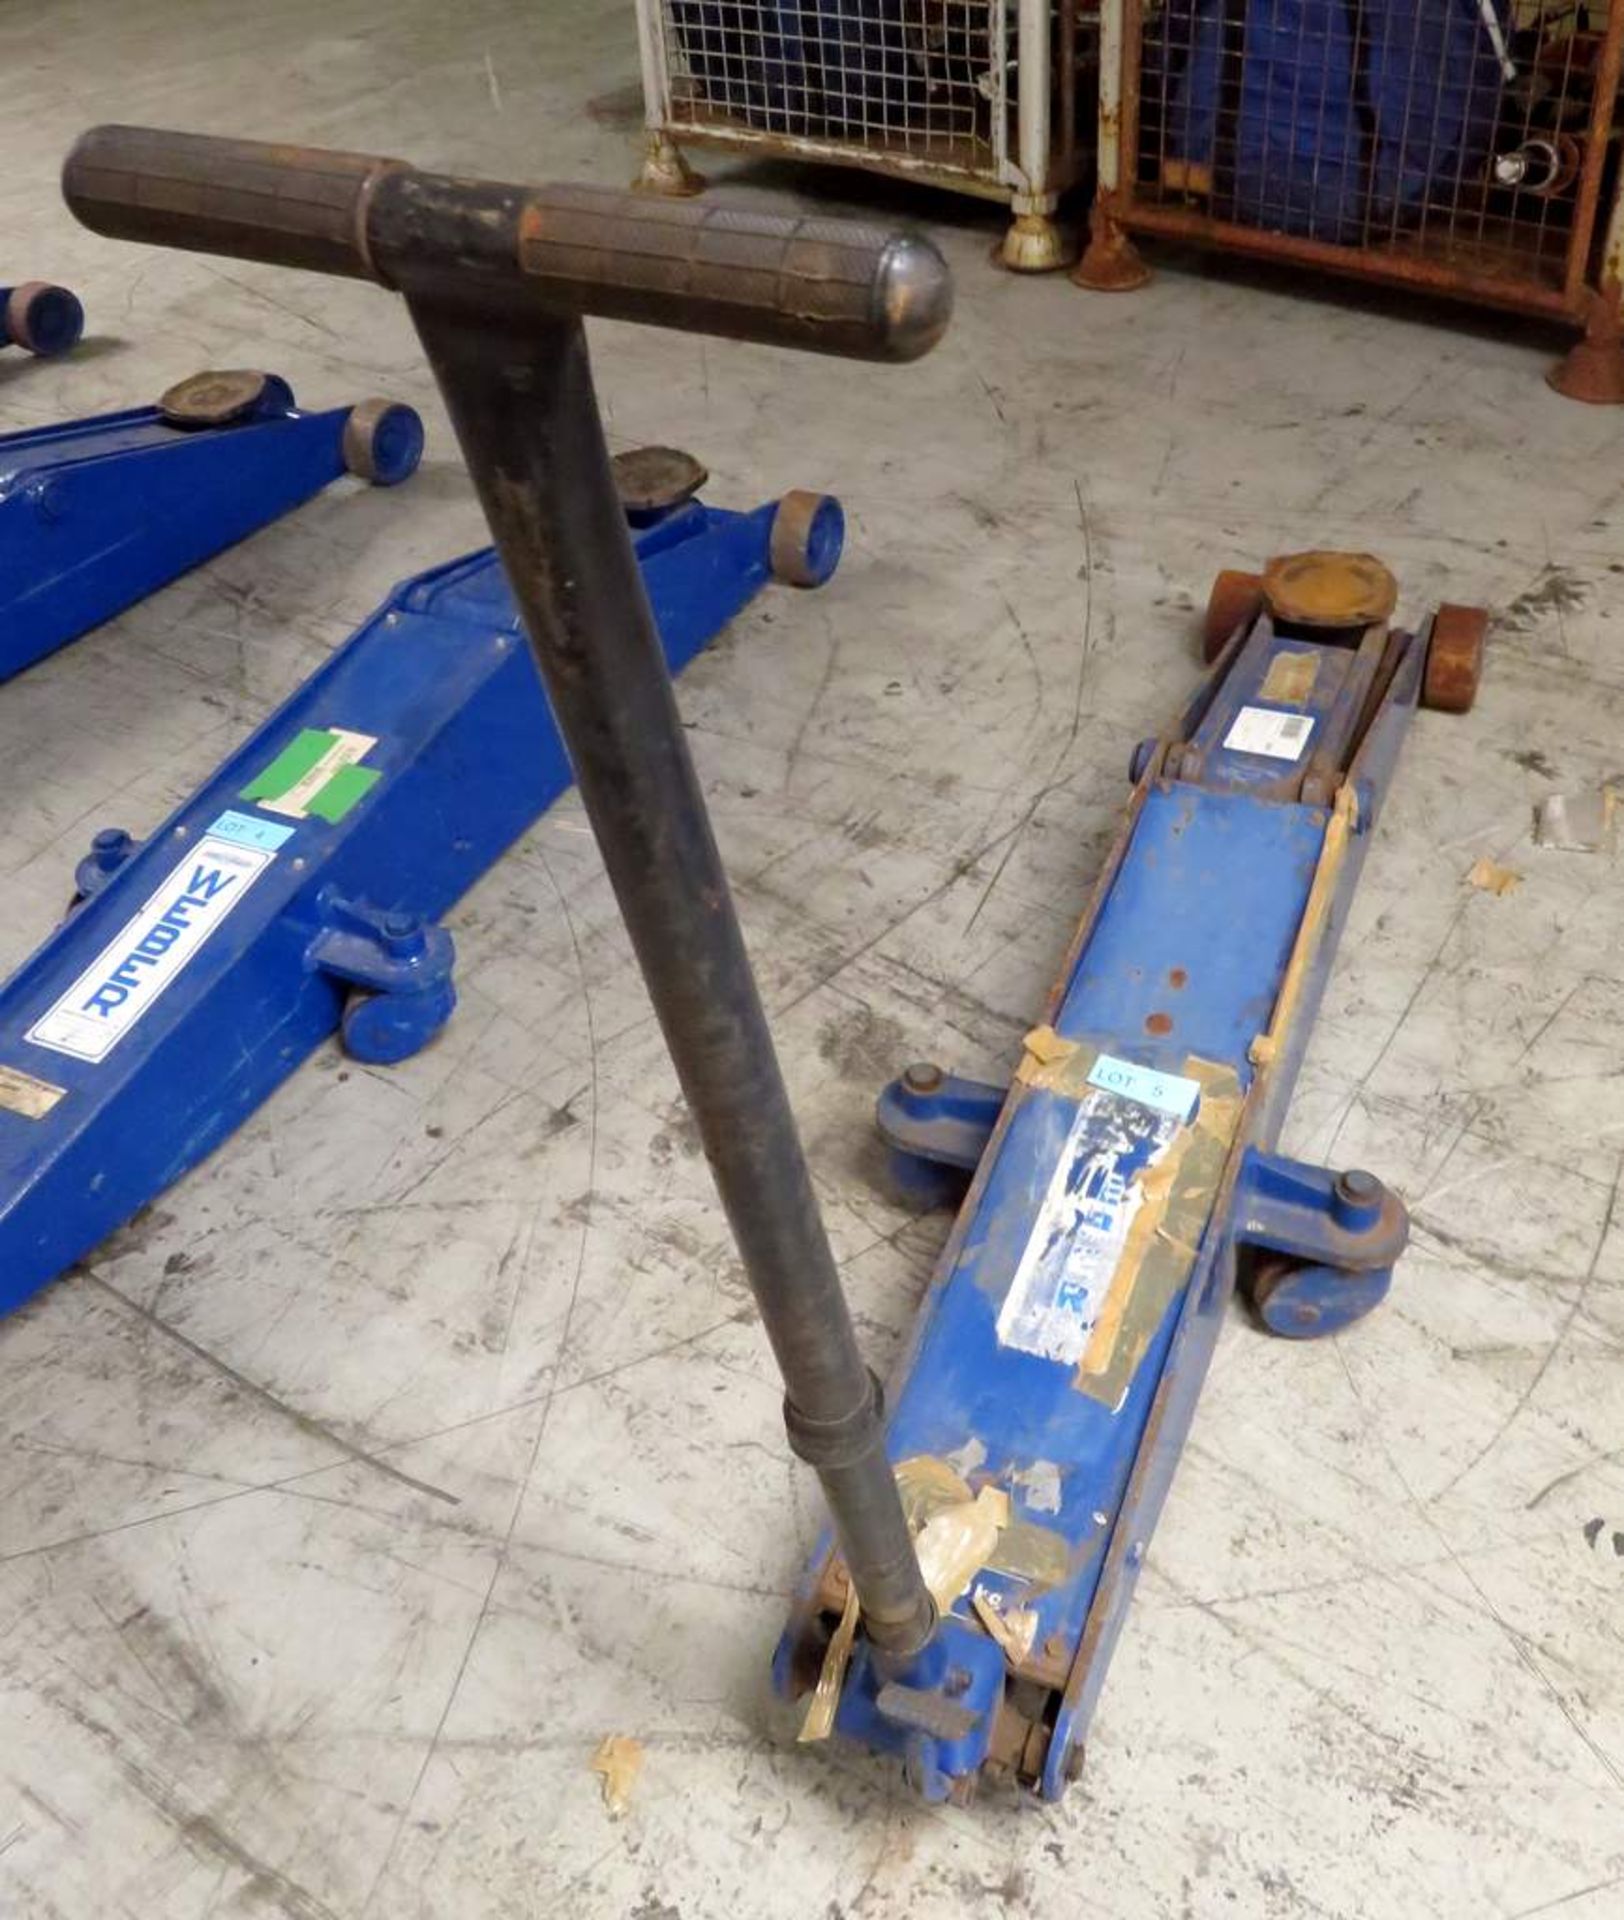 Weber 10 Tonne Vehicle Trolley Jack Complete With Handle - WDK100LQ - Working Condition - Image 2 of 7